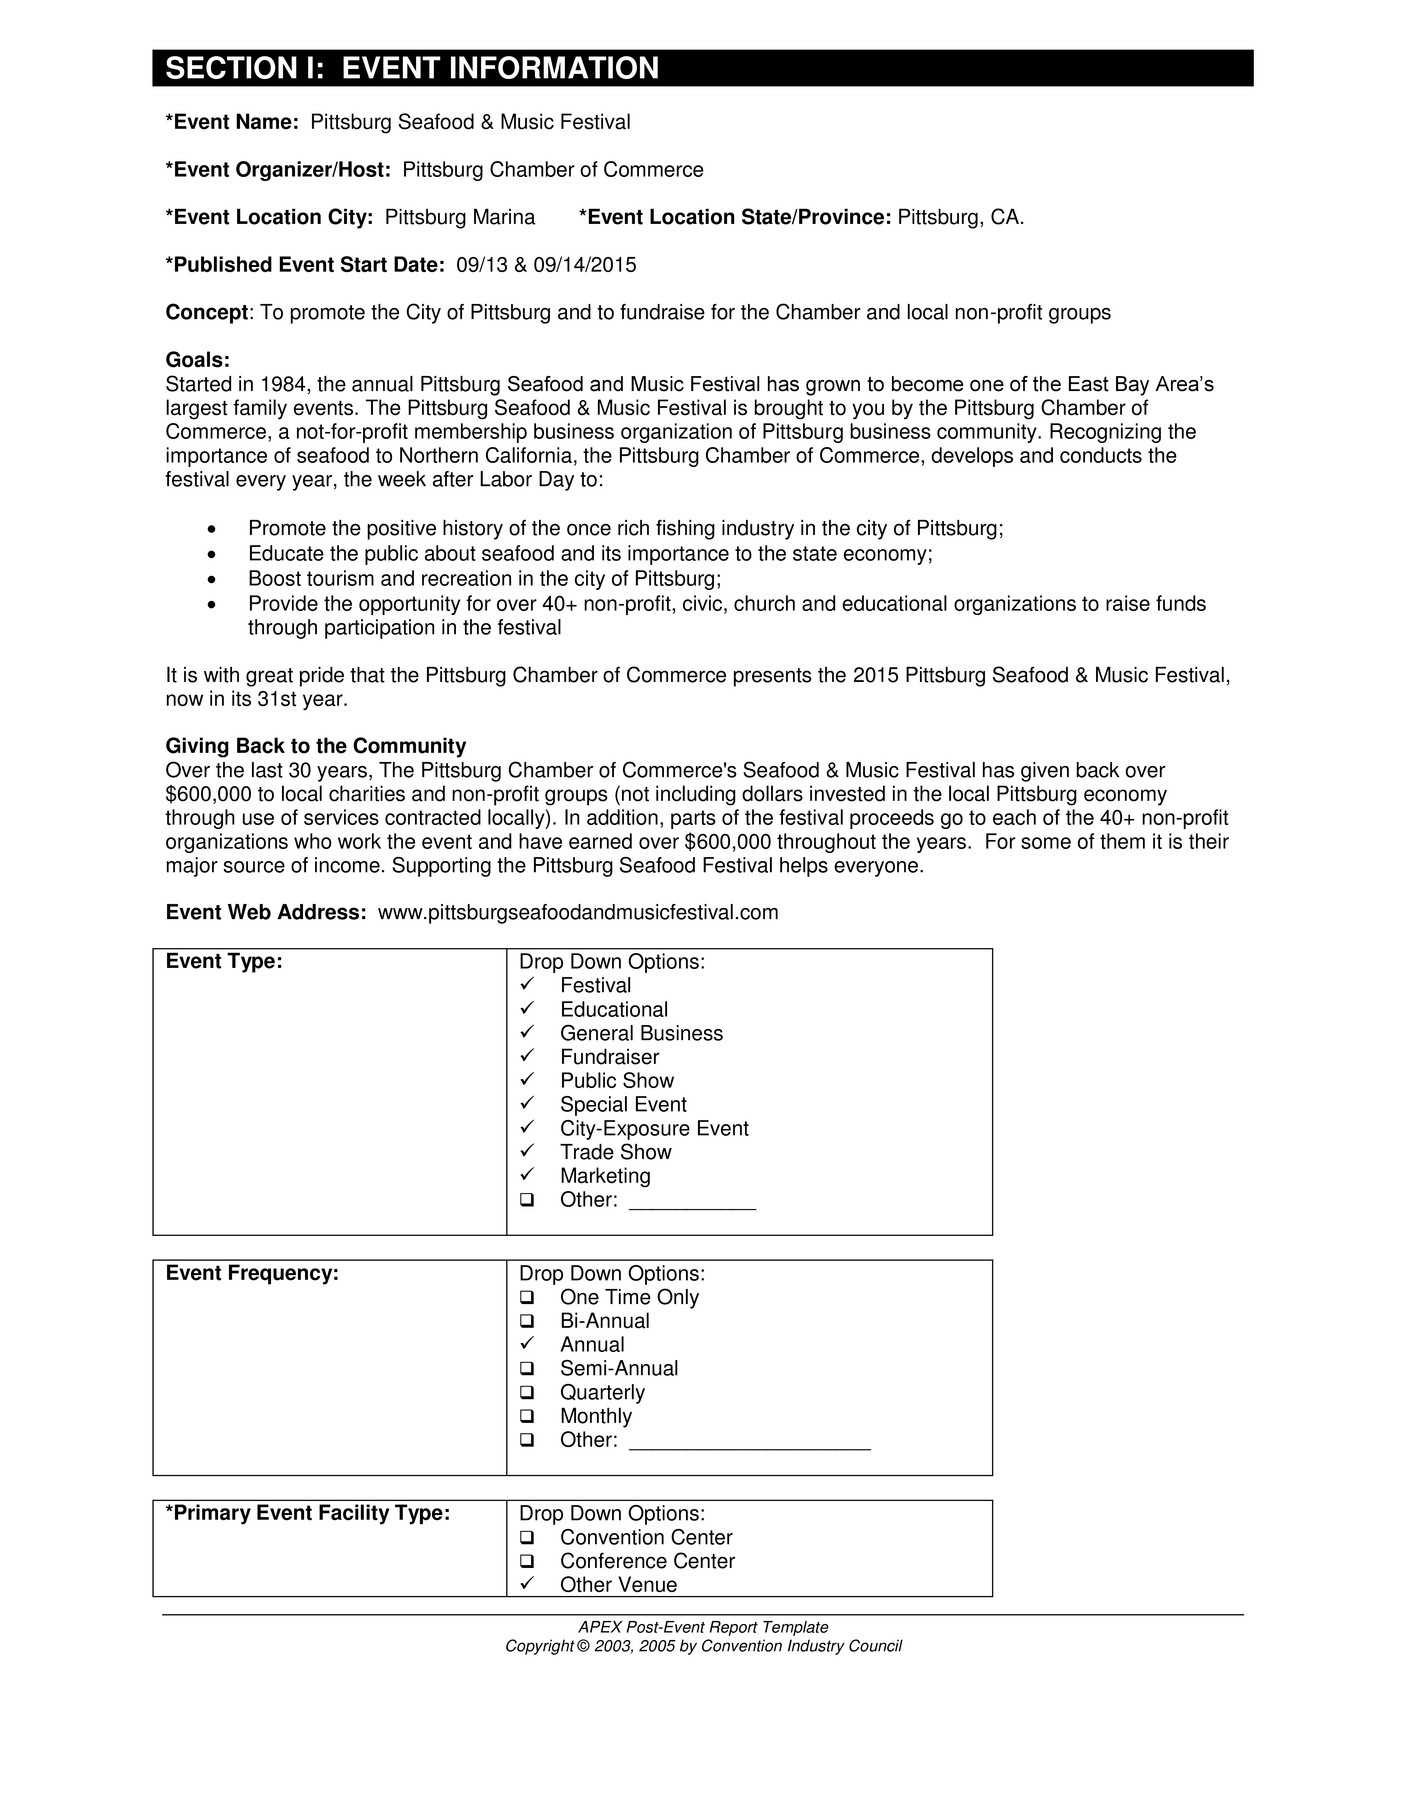 Event Report Template Project Progress Management Expense Intended For After Event Report Template